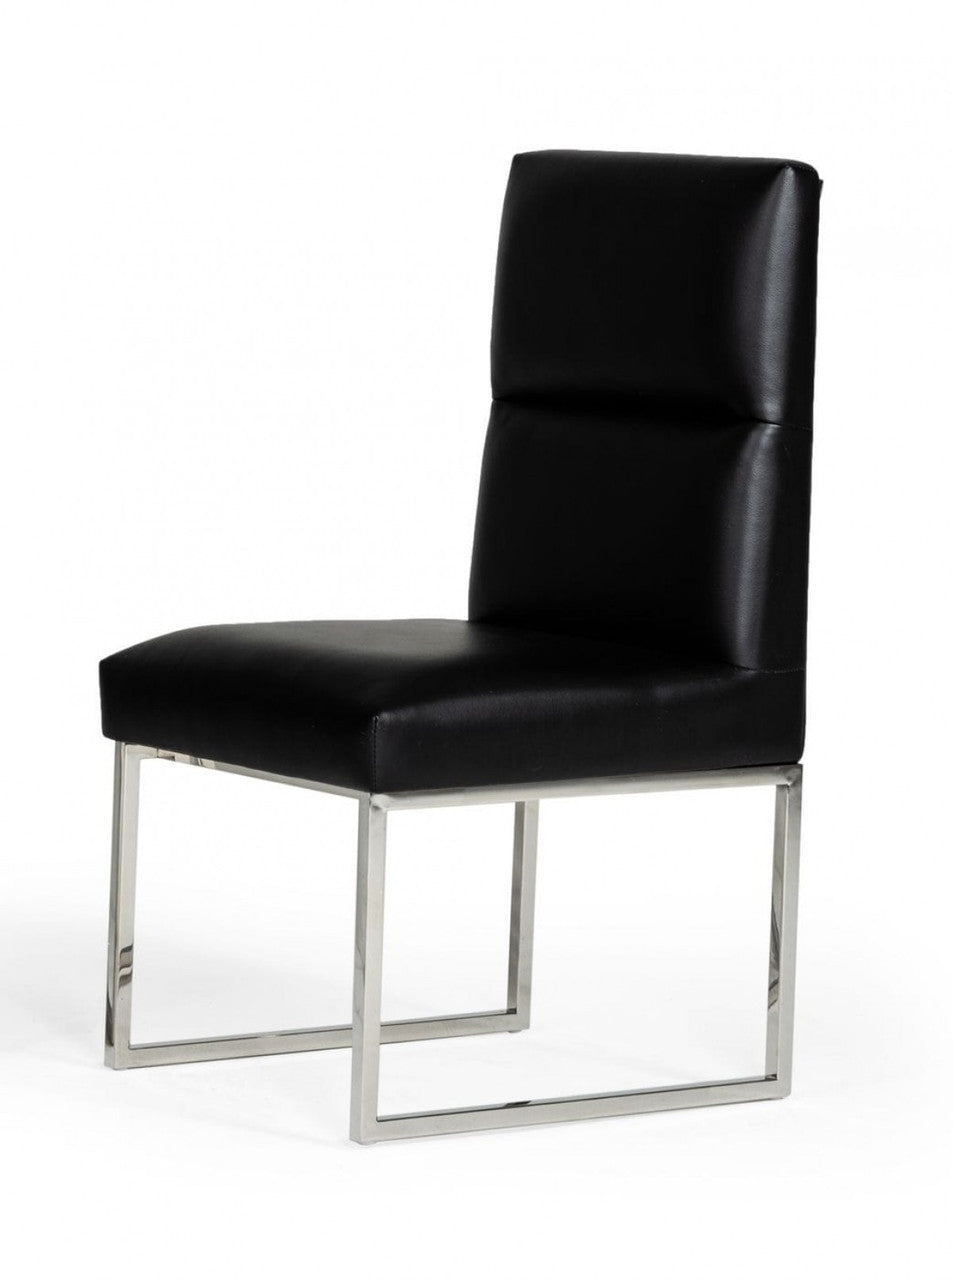 A&X Carla Modern Black Leatherette Dining Chair (Set of 2)